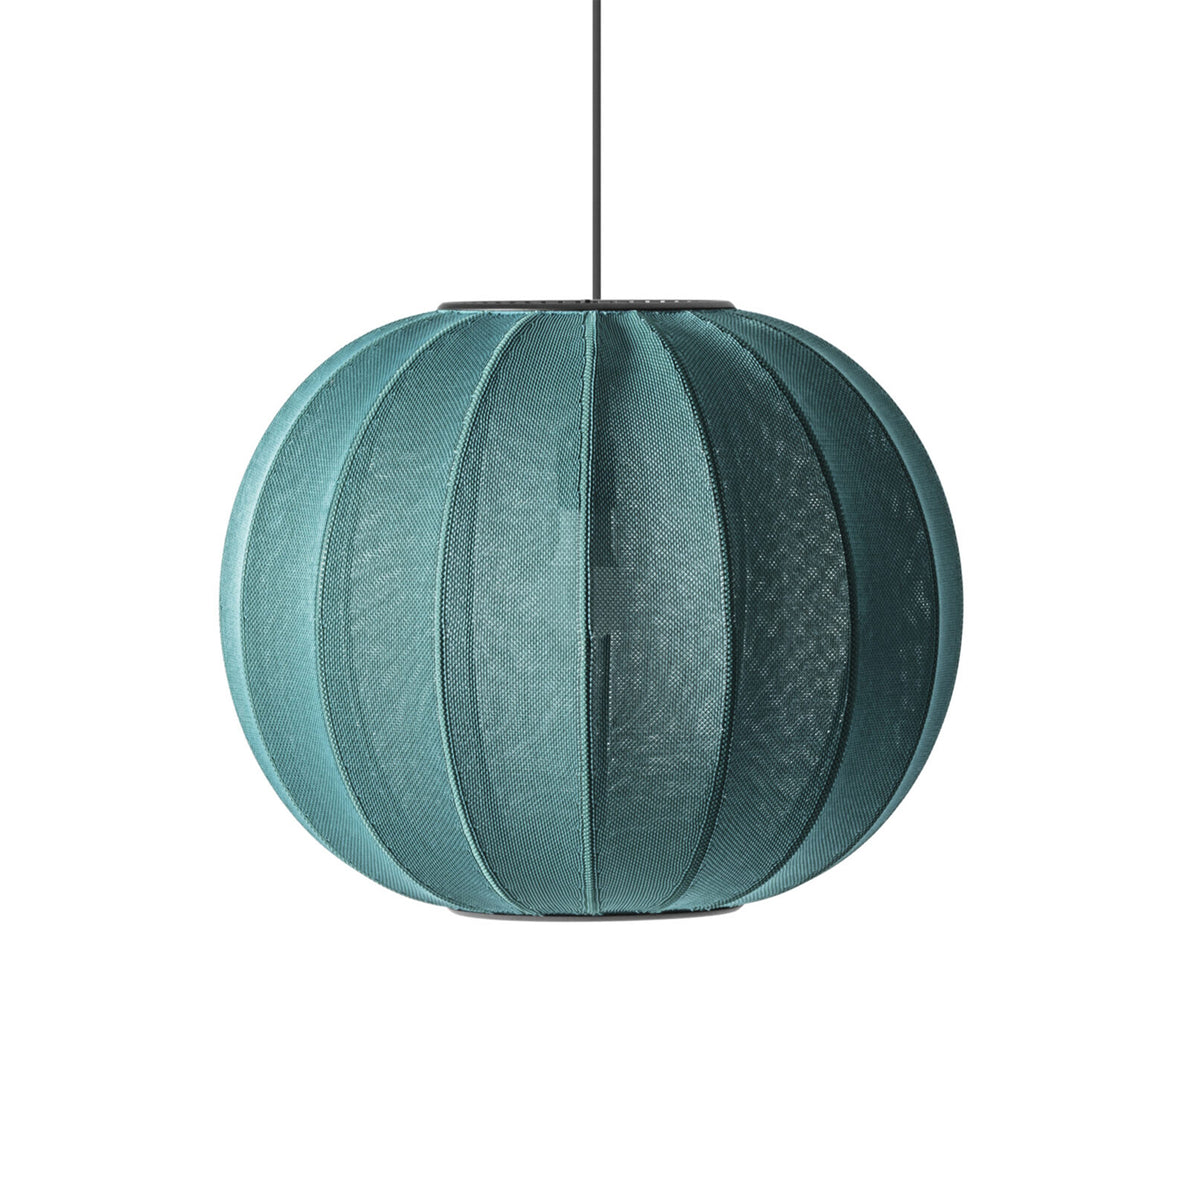 Made by Hand, Knit-Wit Pendant Lamp 45, Pendant,